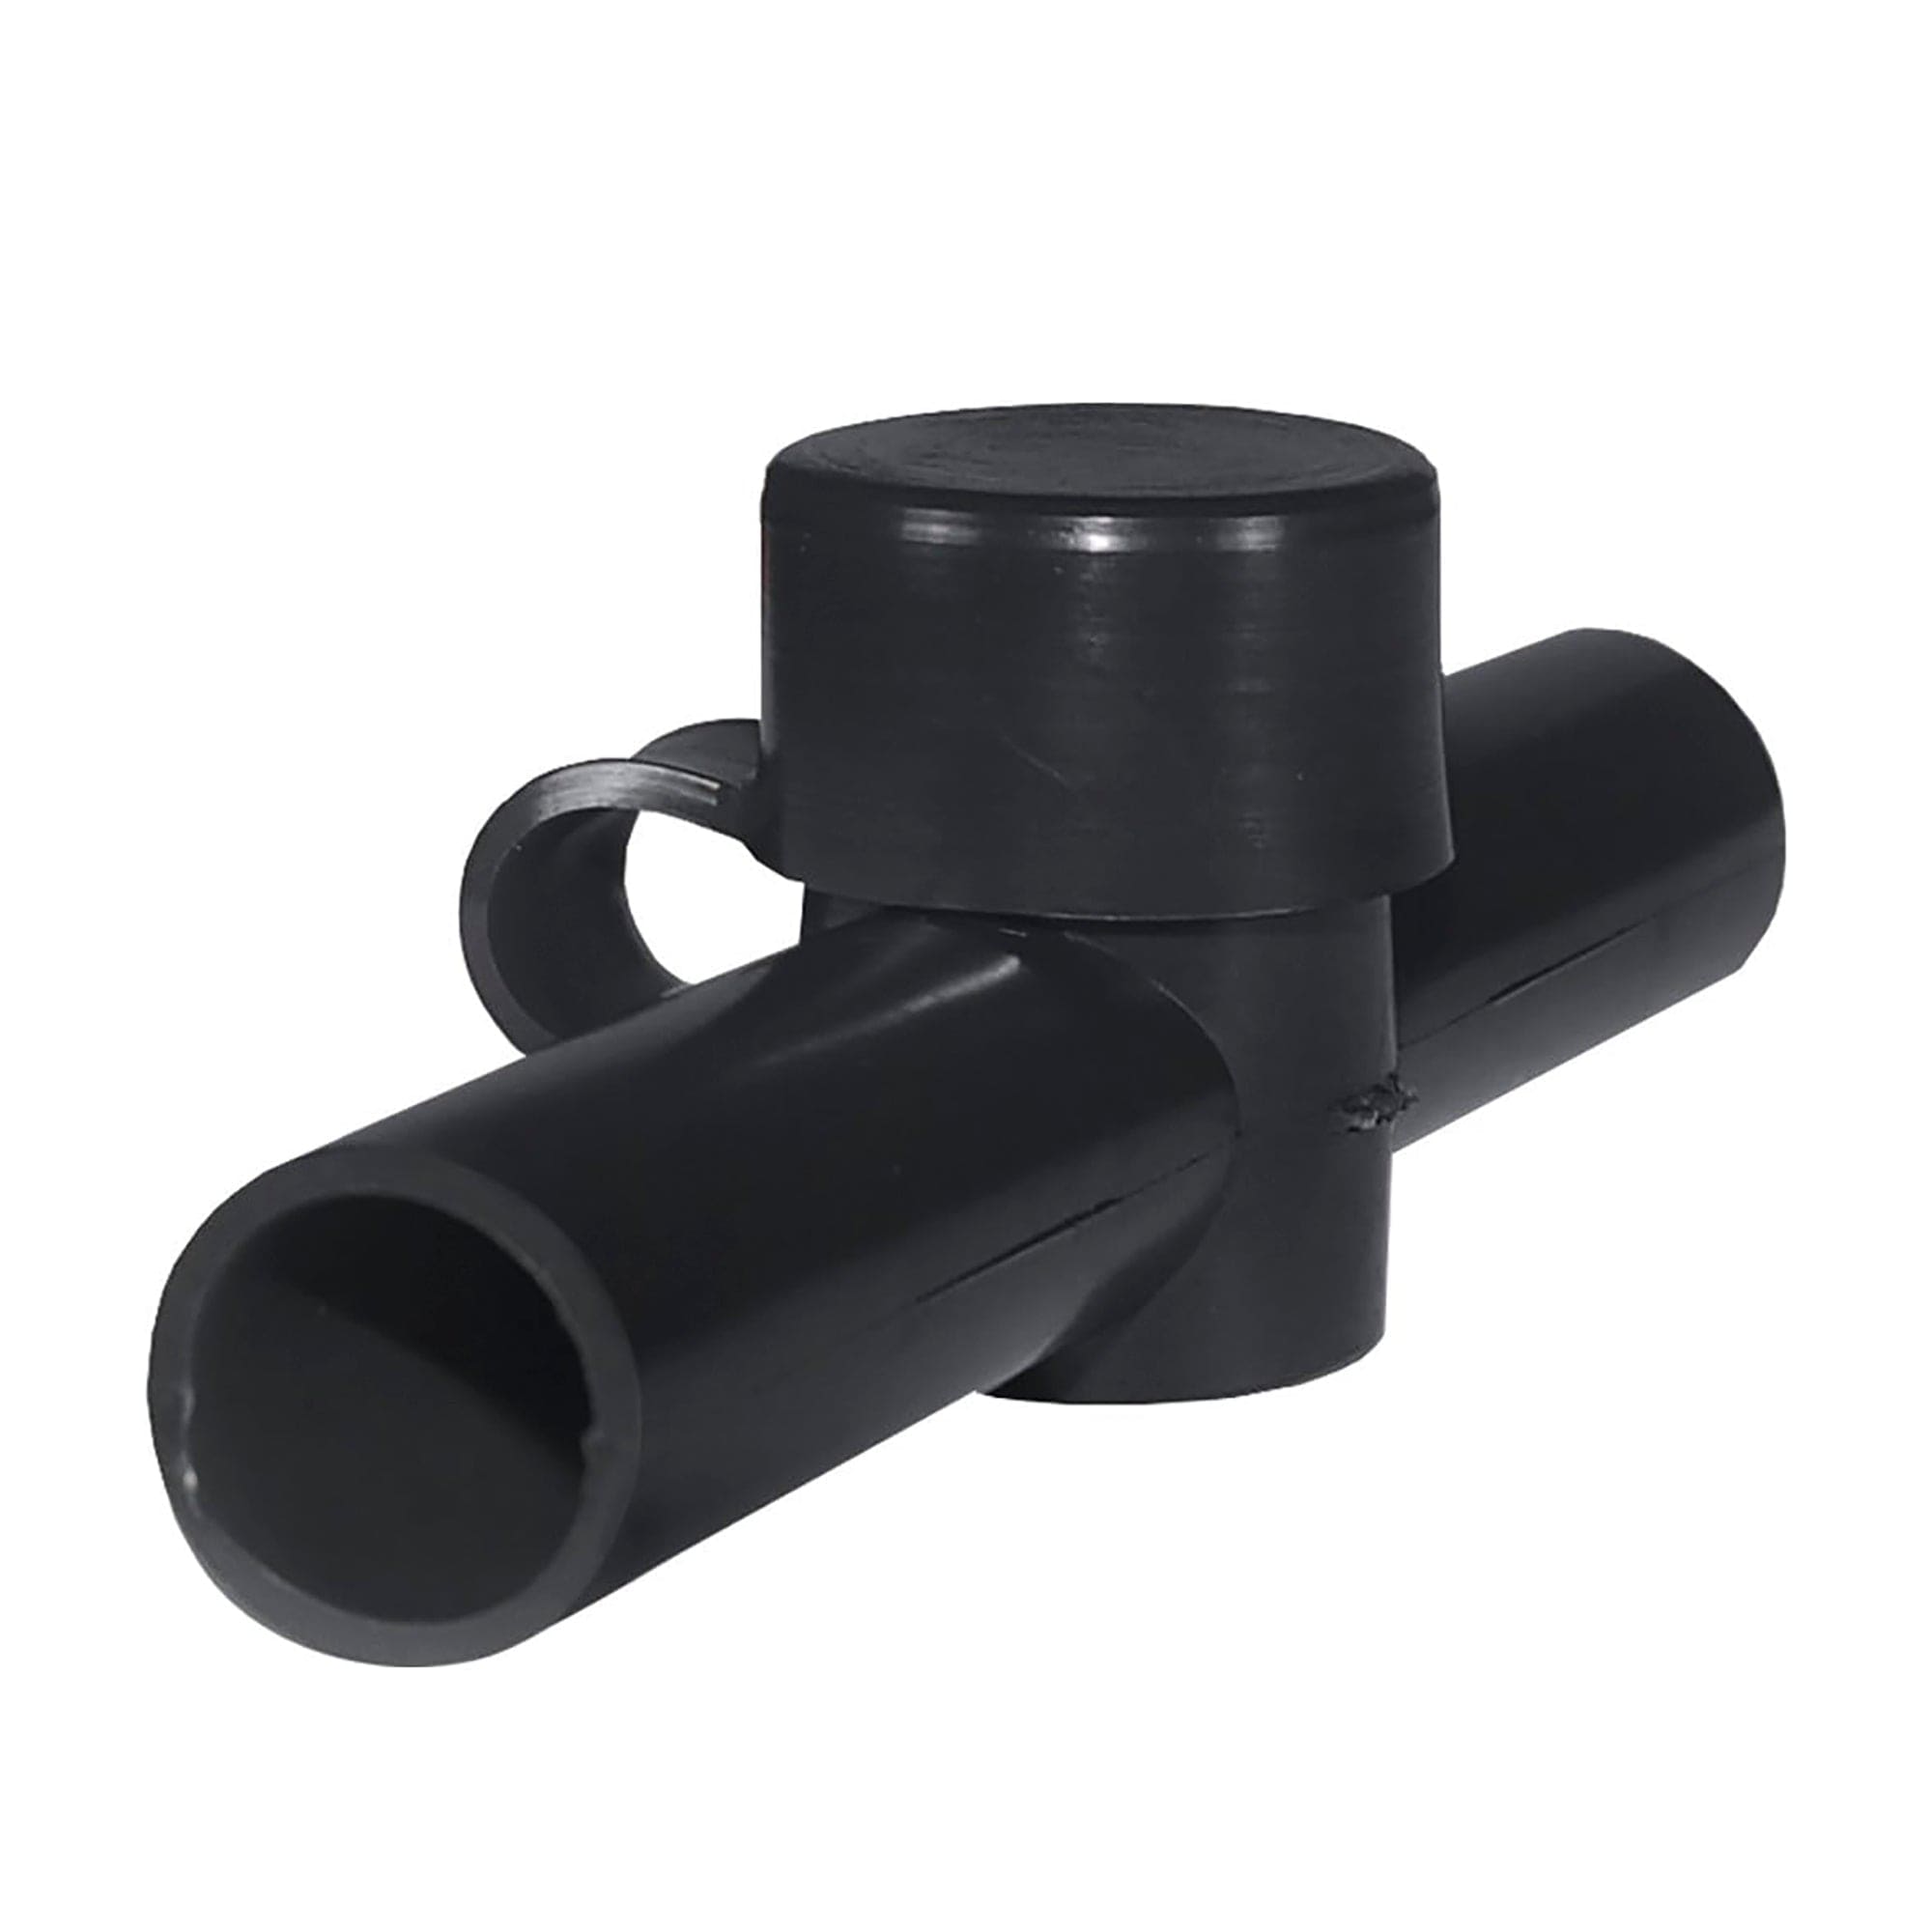 Cable Cap Dual Entry , Black - Blue Sea Systems 4002-BSS